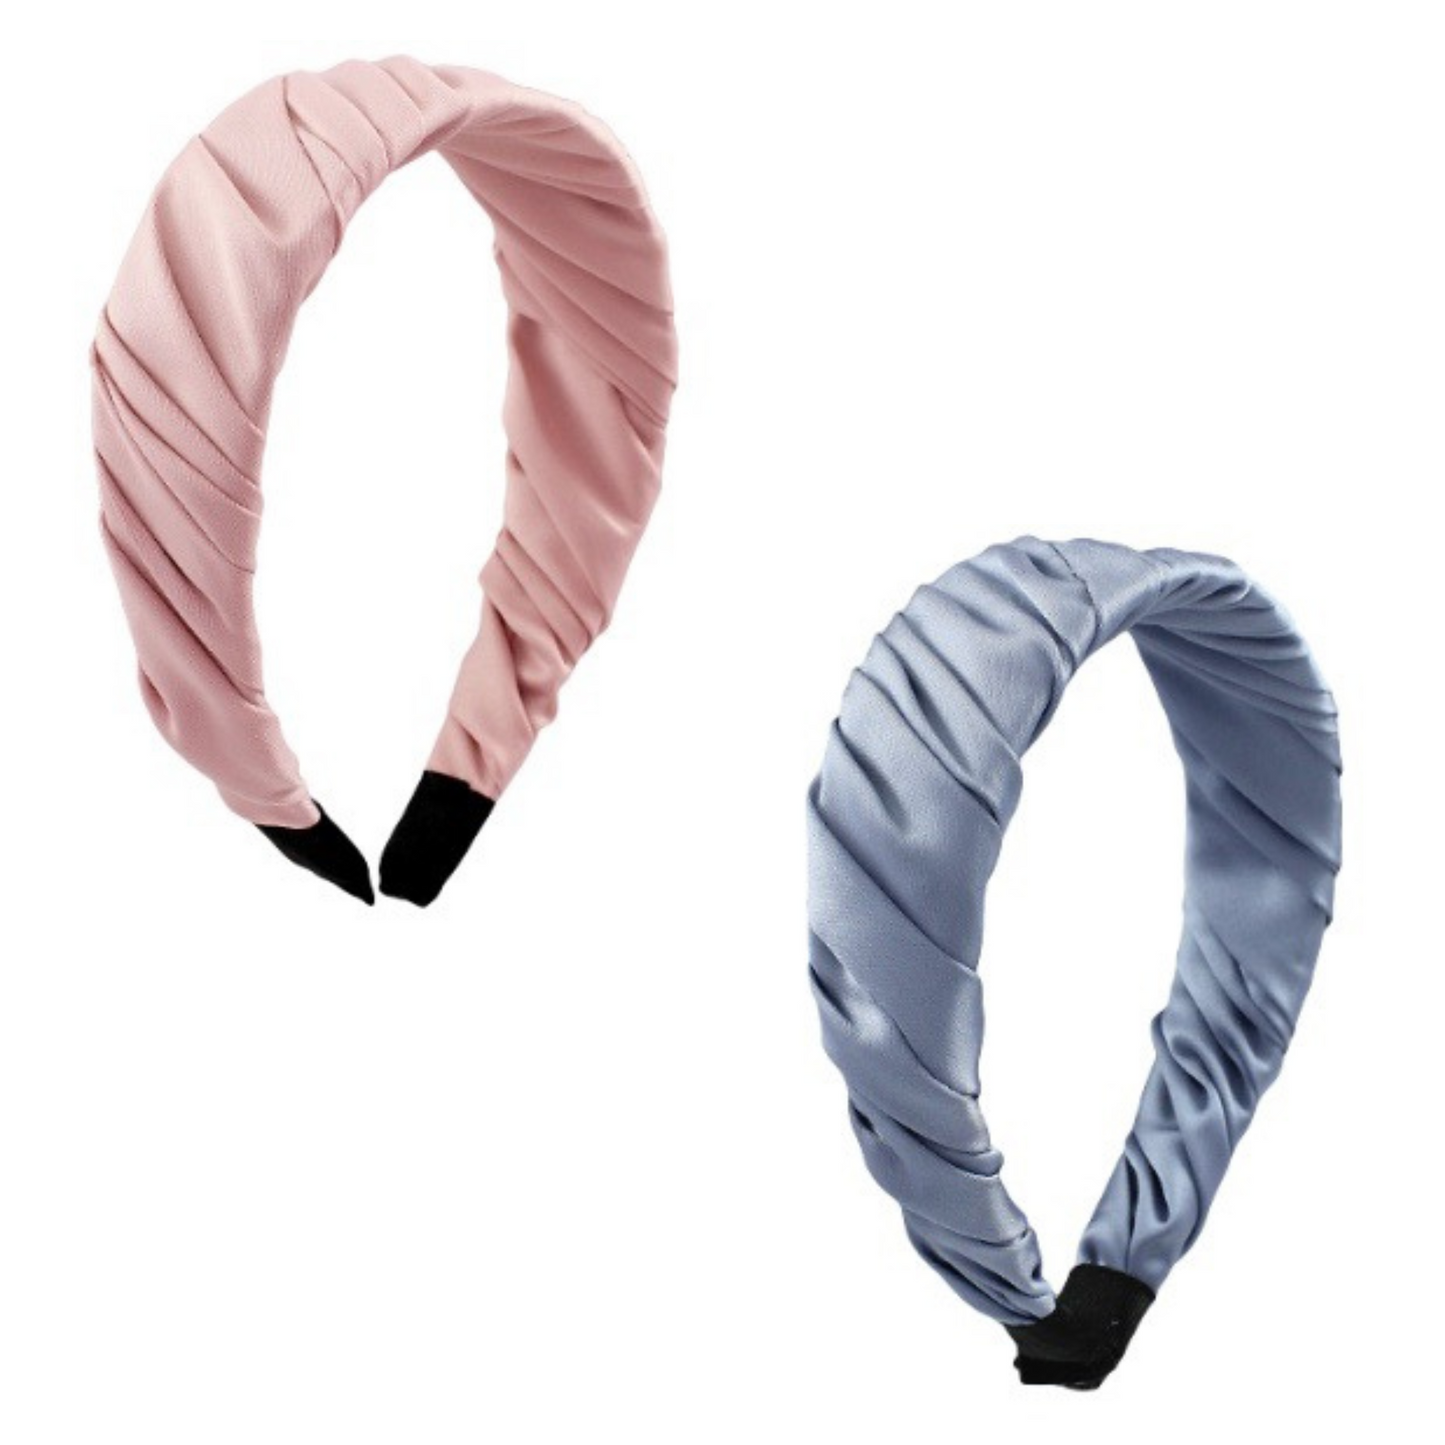 This comfortable fabric wrapped headband comes in two gorgeous colors - a soft pink, and a stylish blue. Boasting a fashionable and elegant look, this accessory is both a stylish and reliable choice for any occasion.